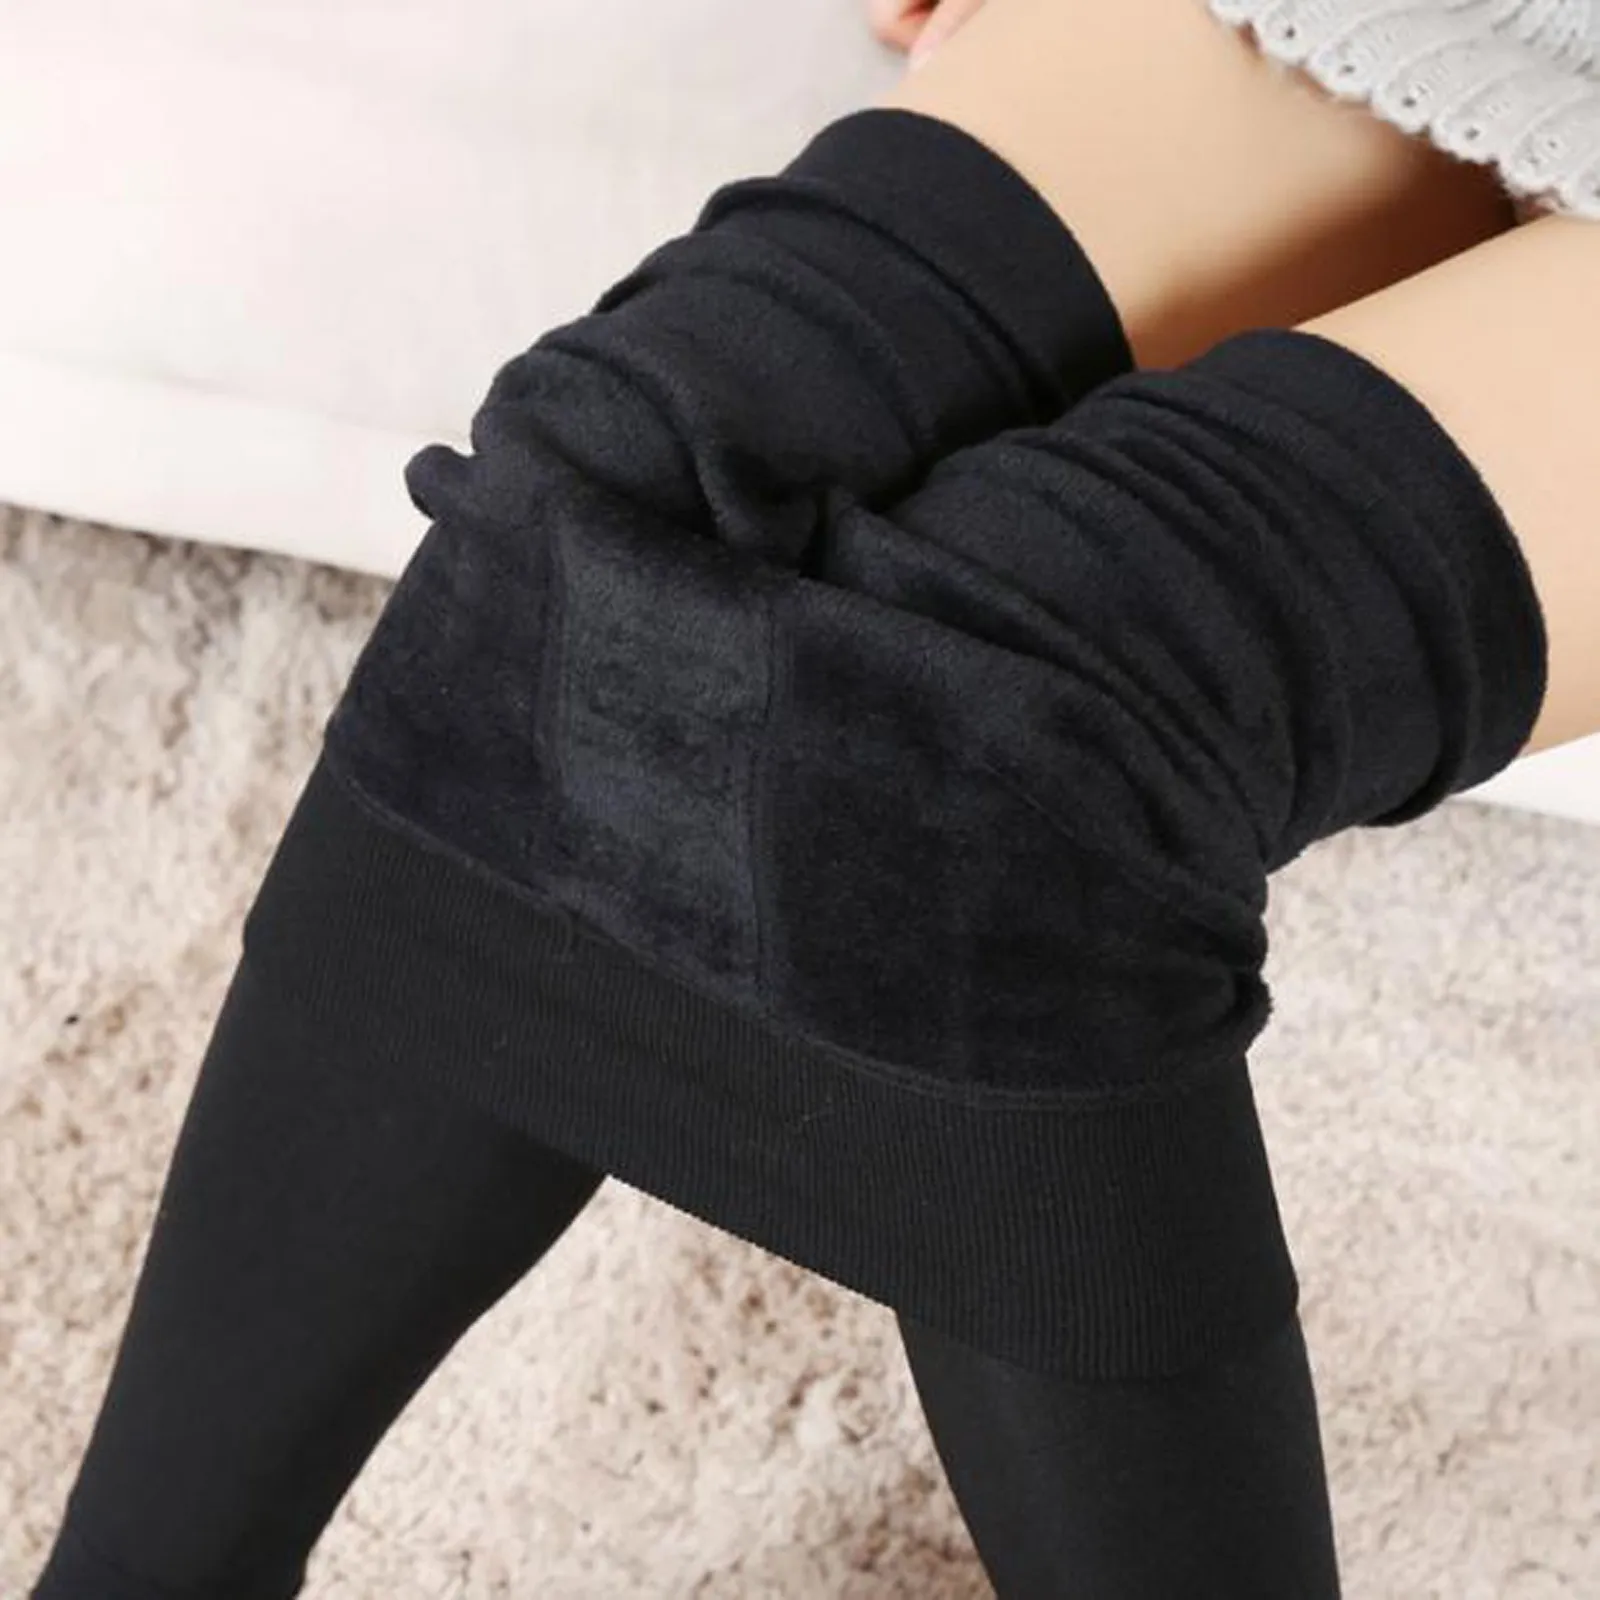 Winter Warm Legging Trousers Solid Women Velvet Thick Leggings Pants High Waist Elastic Tight Female Workout Cropped Underwear women winter thick lambskin cashmere pants loose long trousers middle aged female warm casual high waist stretch pants plus size